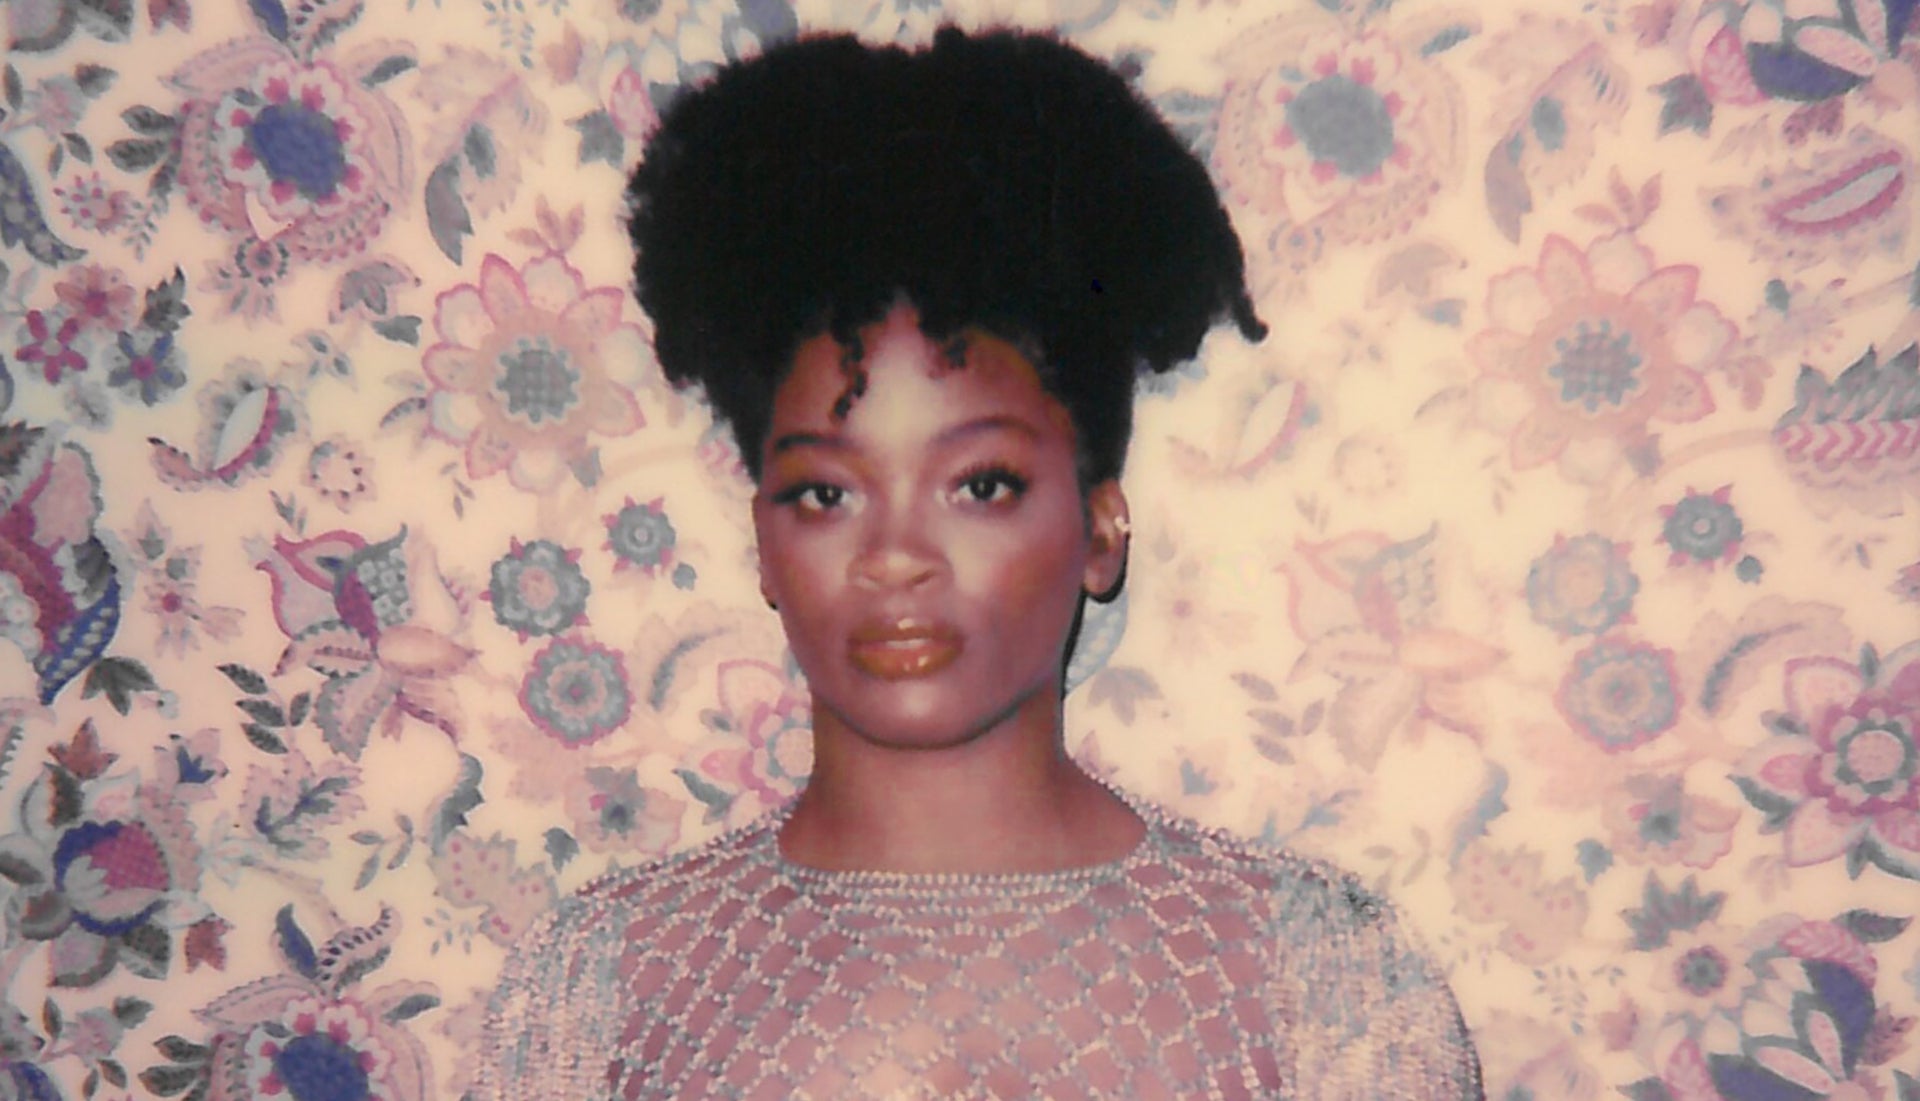 Ari Lennox Claps Back At Homophobic People: ‘If You Don’t Support LGBTQ Community, You Don’t Support Me’